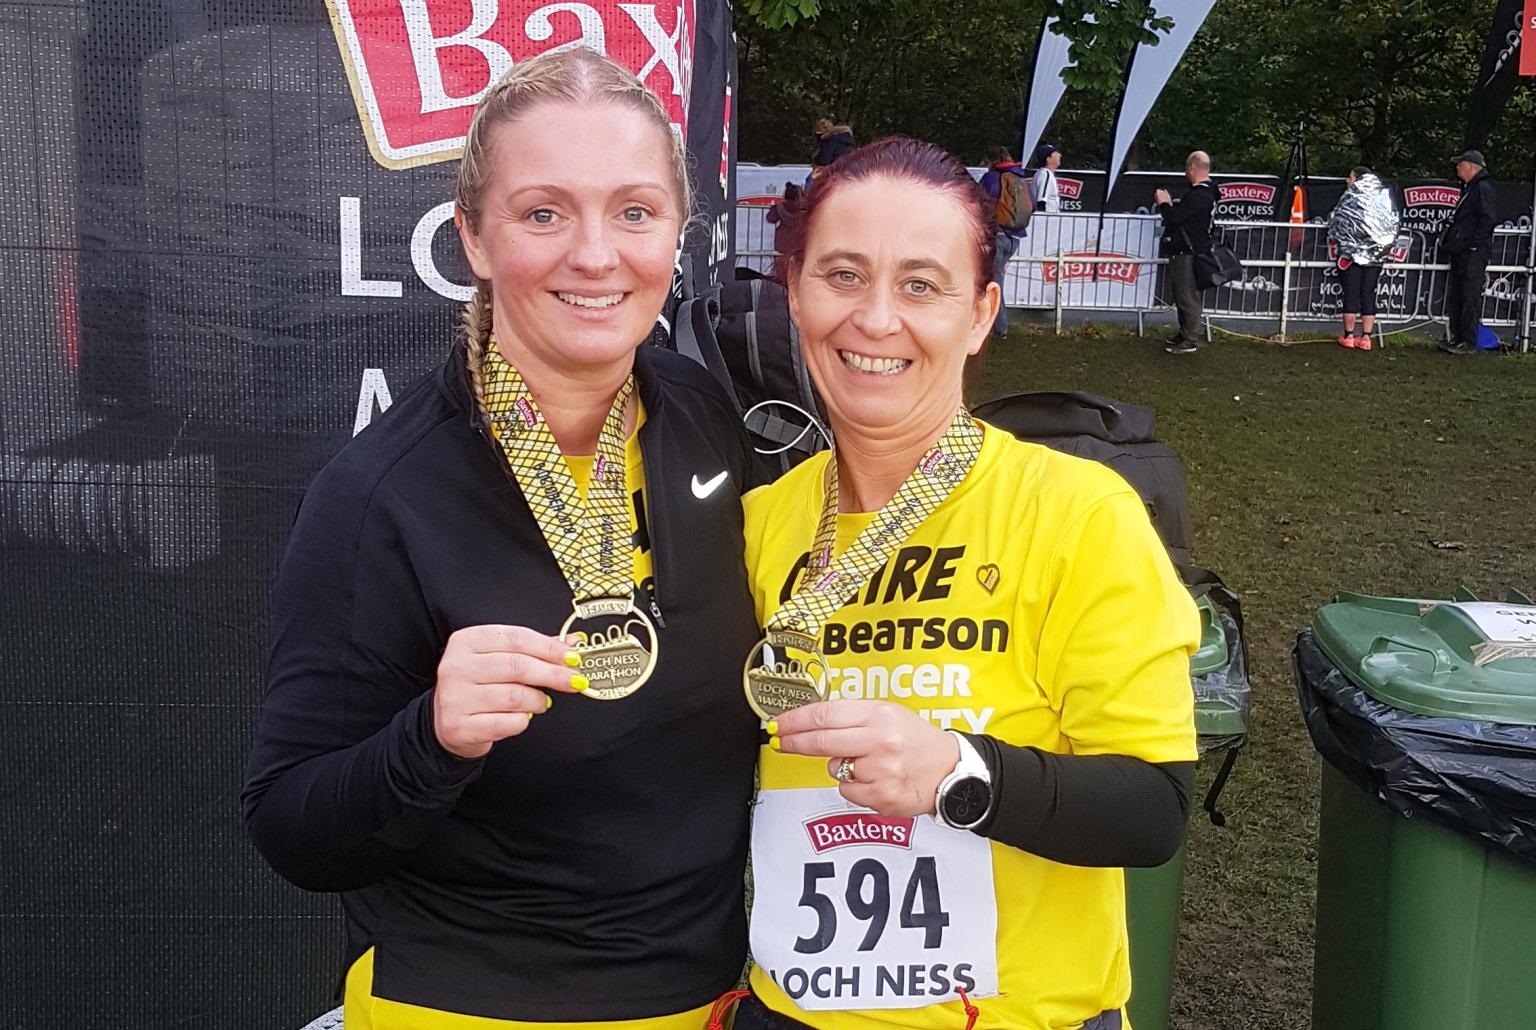 Taylor and Fraser duo take on 2019 Loch Ness Marathon